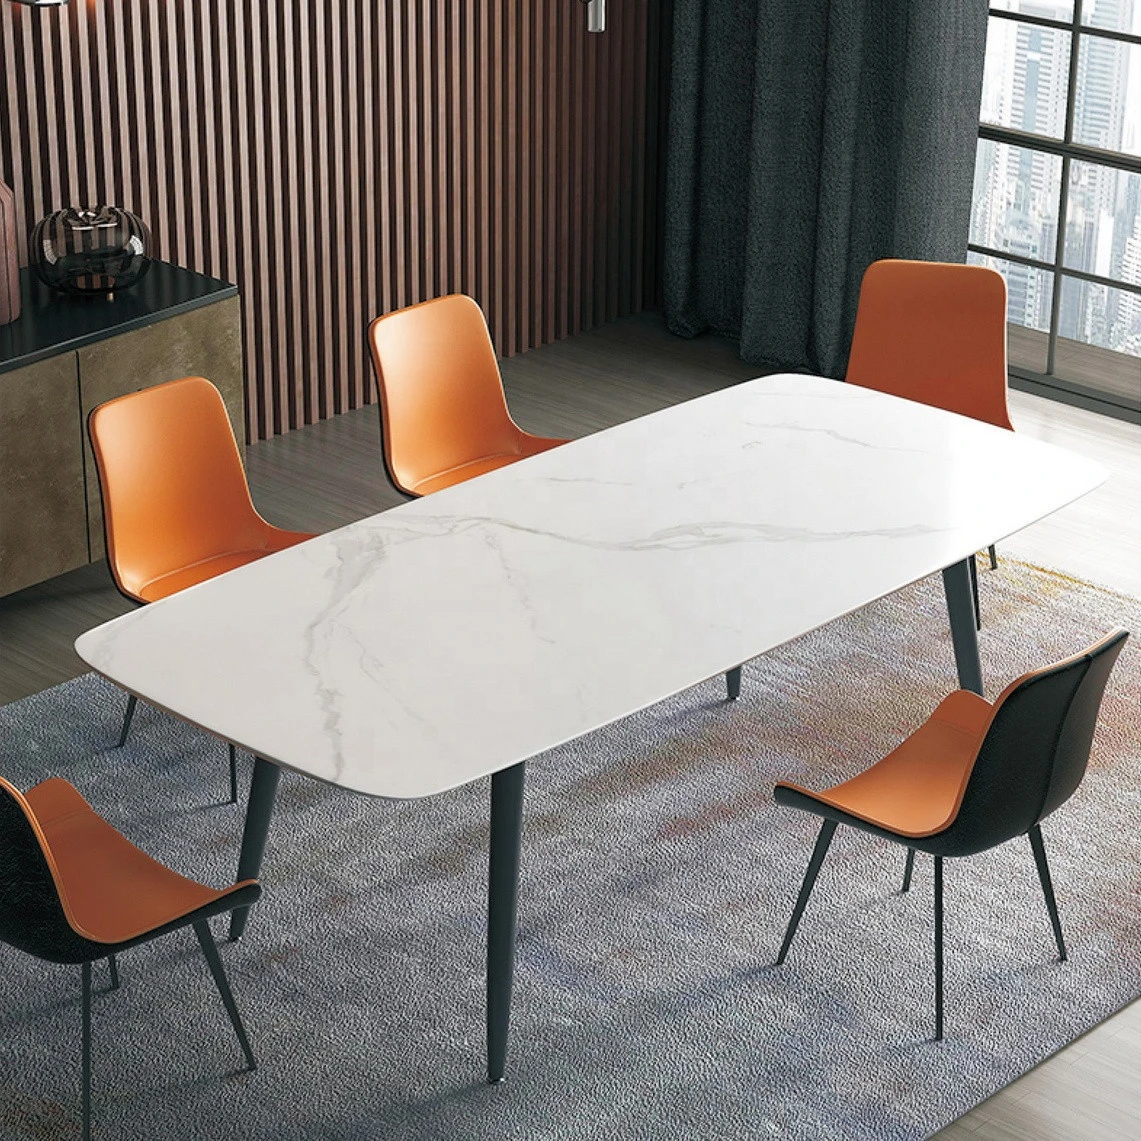 OEM Dining furniture ceramic table top sintered artificial stone table